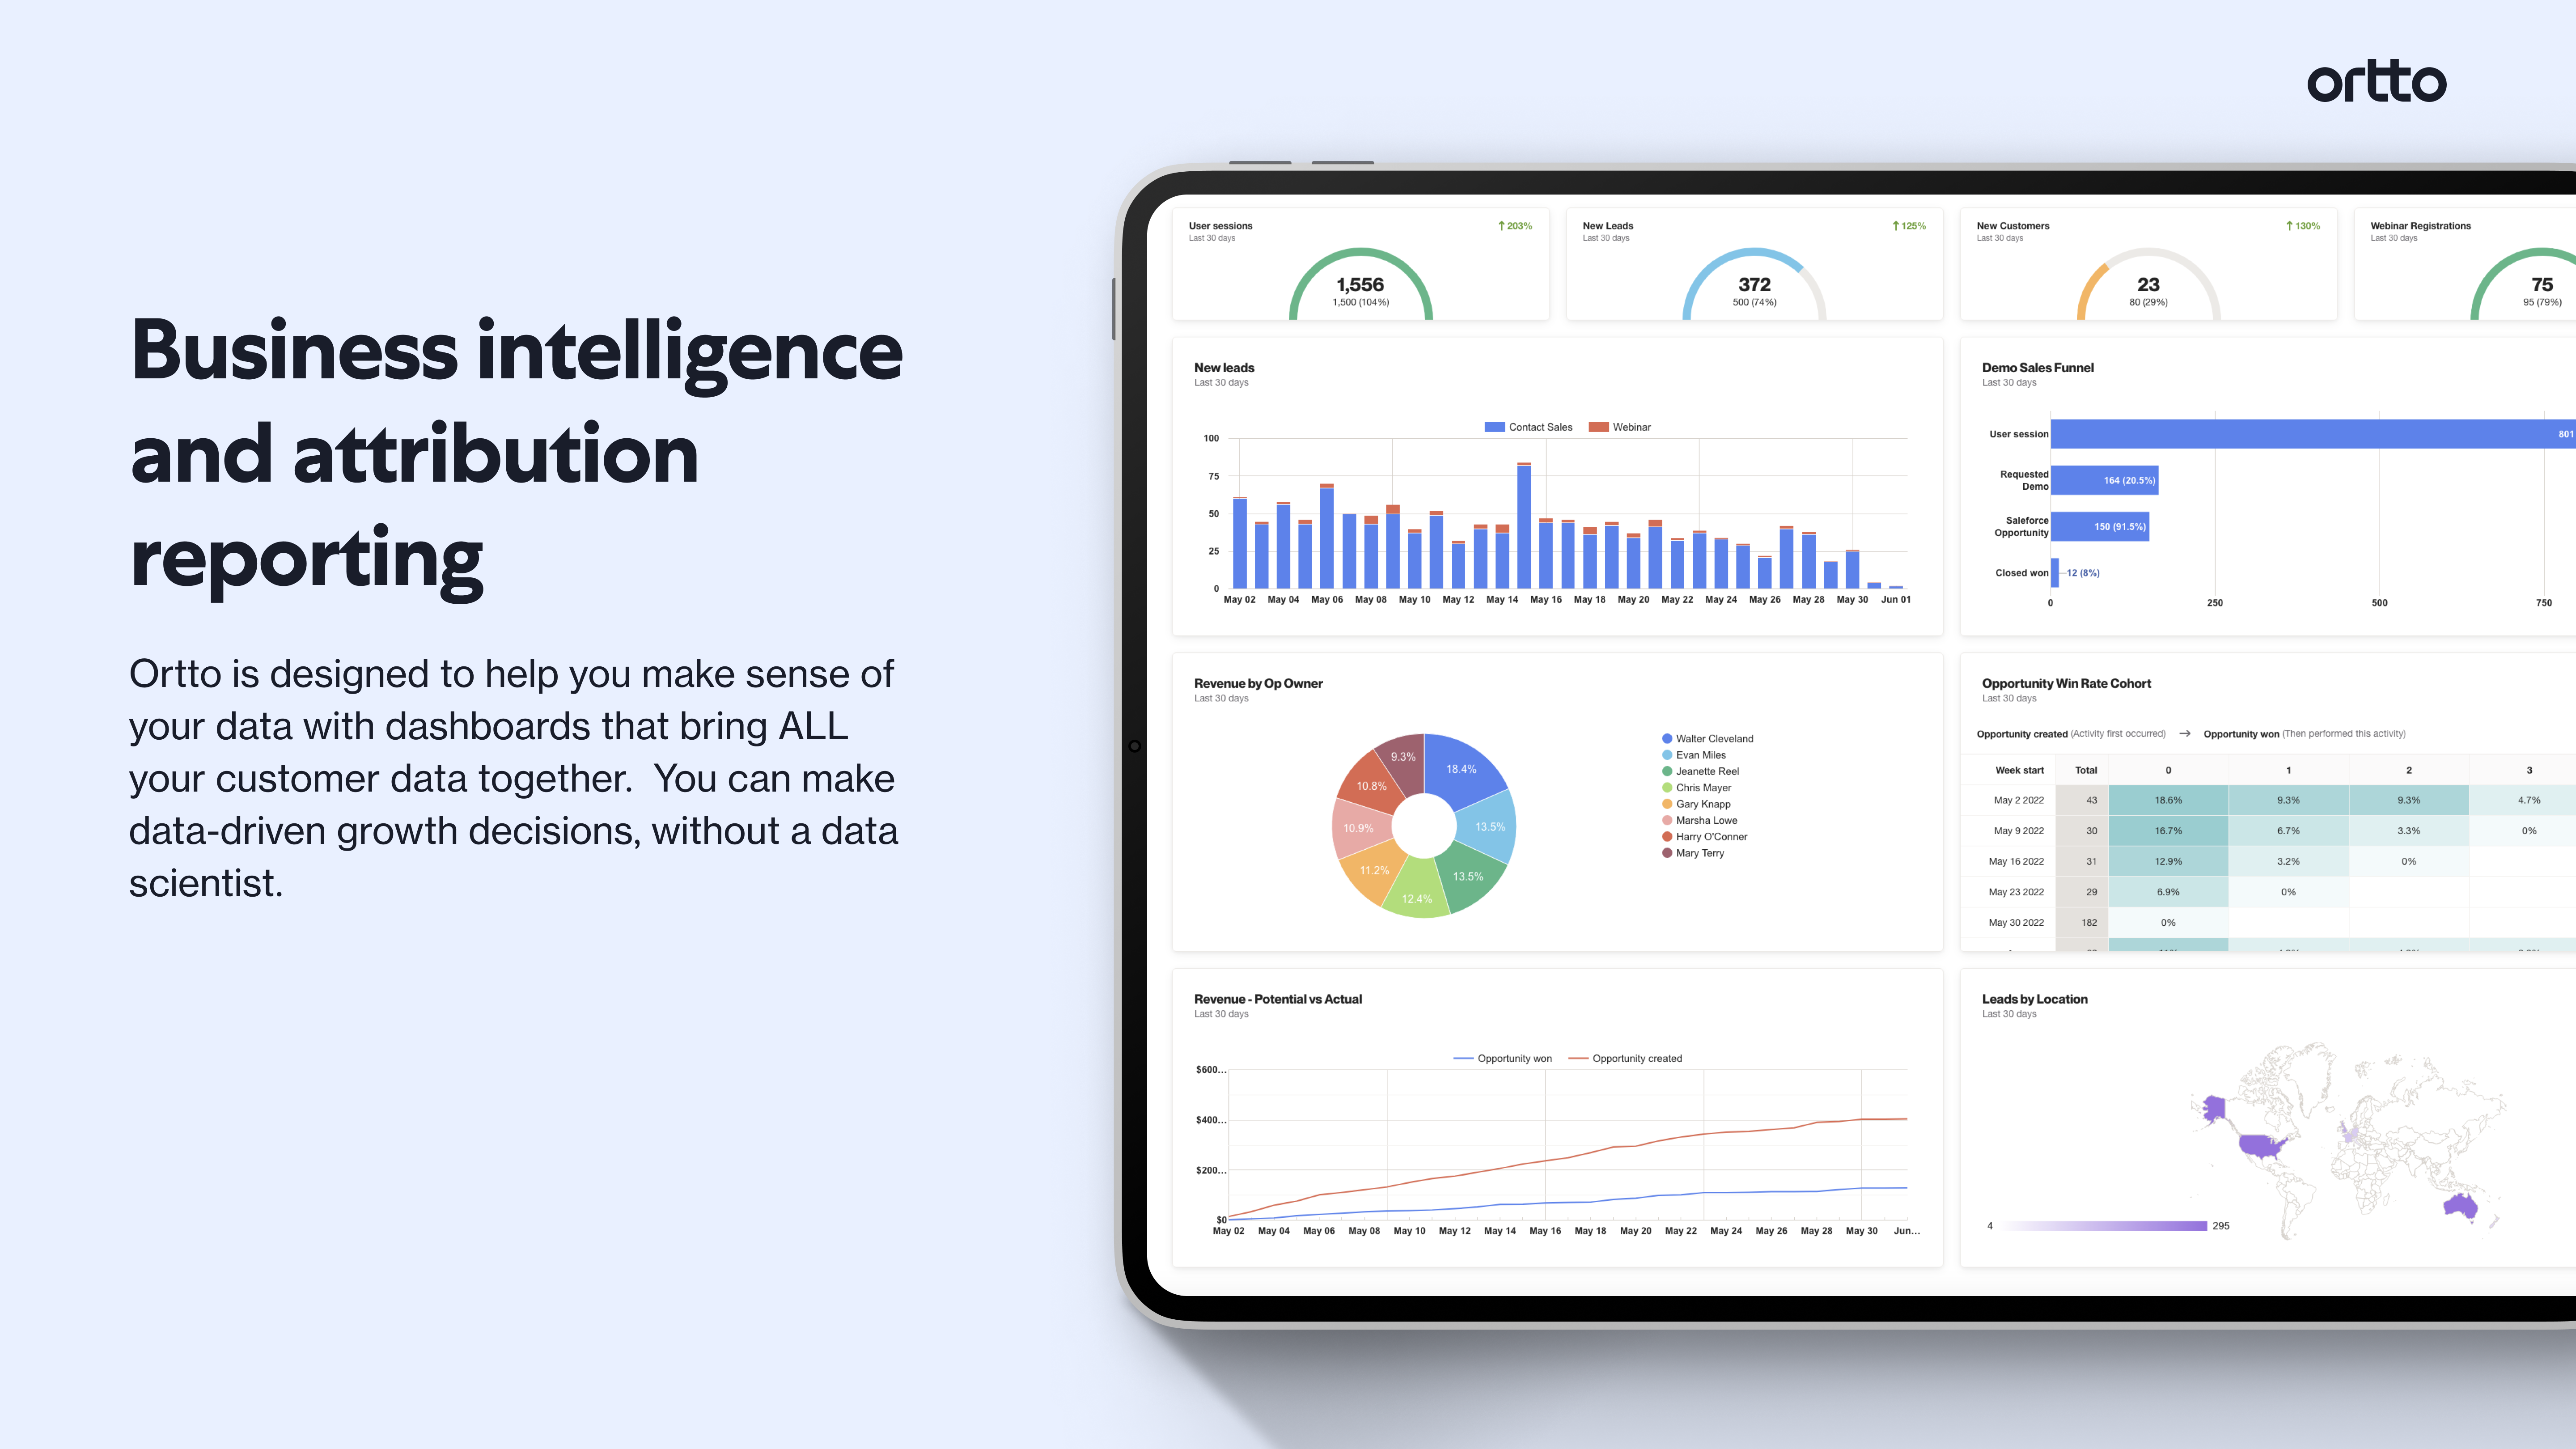 Ortto was built to give businesses instant, real-time access to simplified business intelligence, reporting, and dashboard tools with built-in revenue attribution that ensures you can track the metrics that matter to your business.